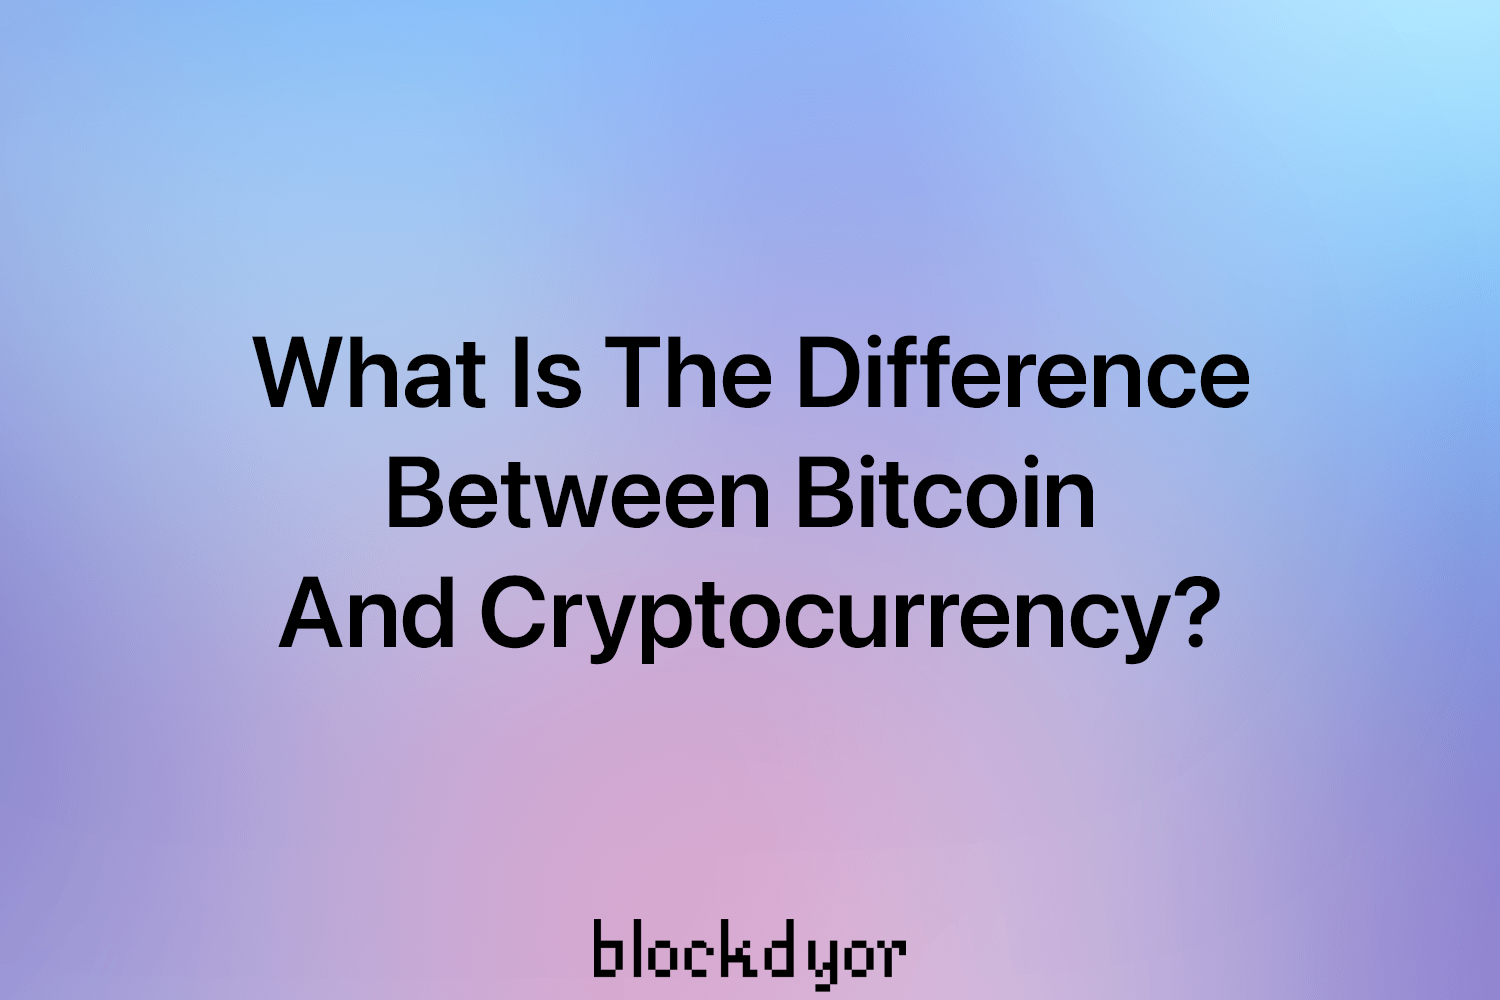 whats the difference between bitcoin and crypto